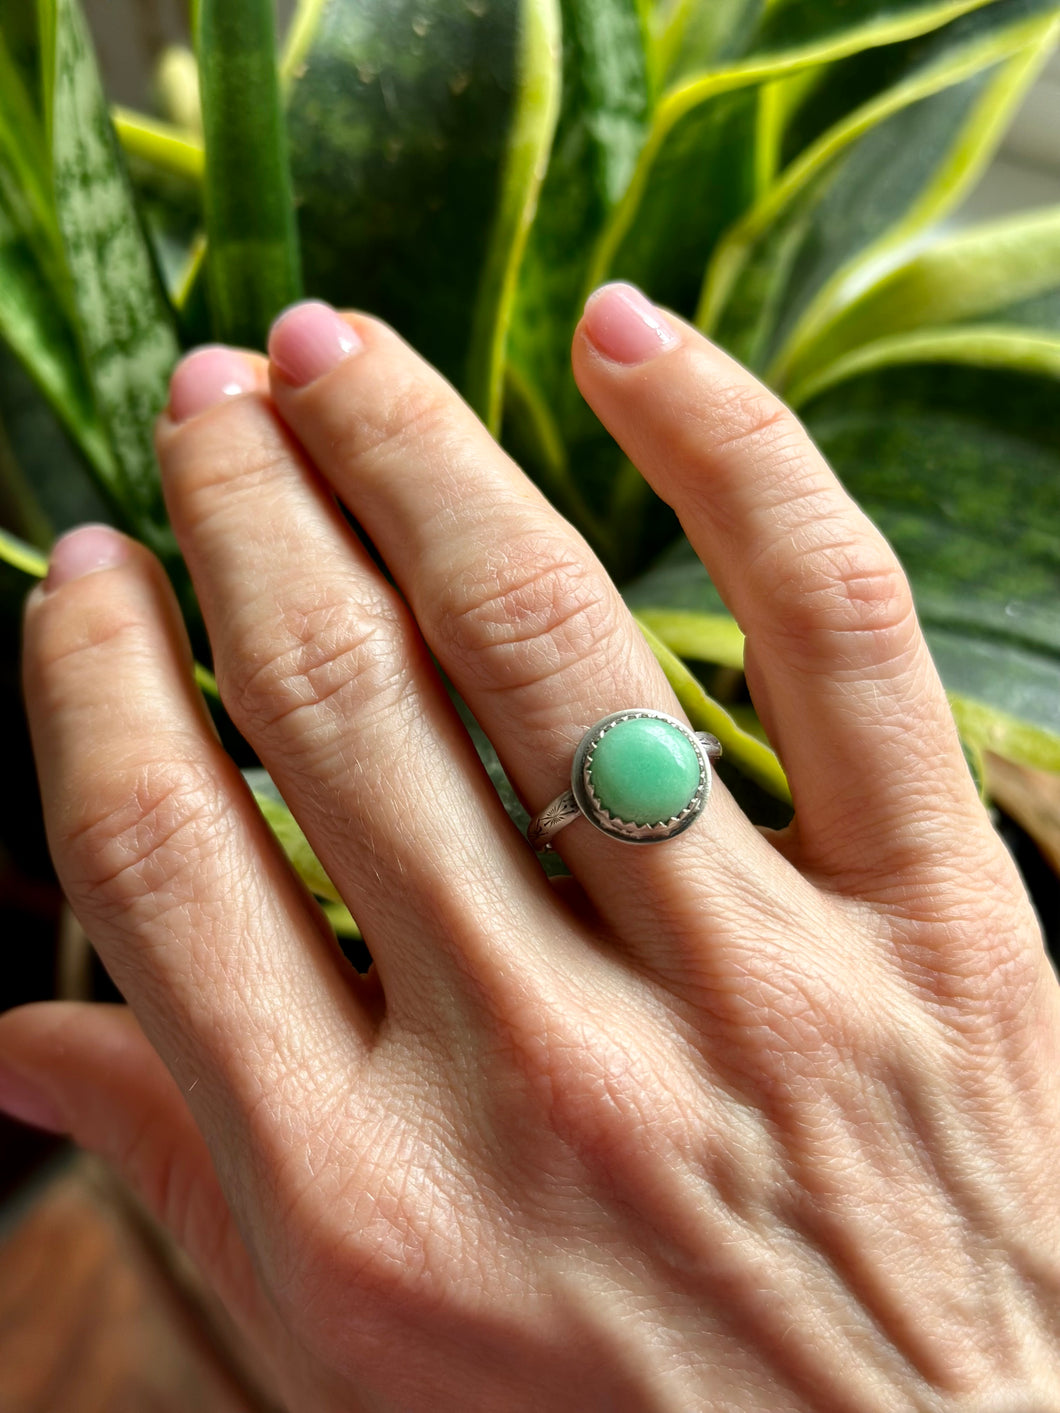 Natural Minty Green Chrysoprase Sterling Silver Ring, size 9